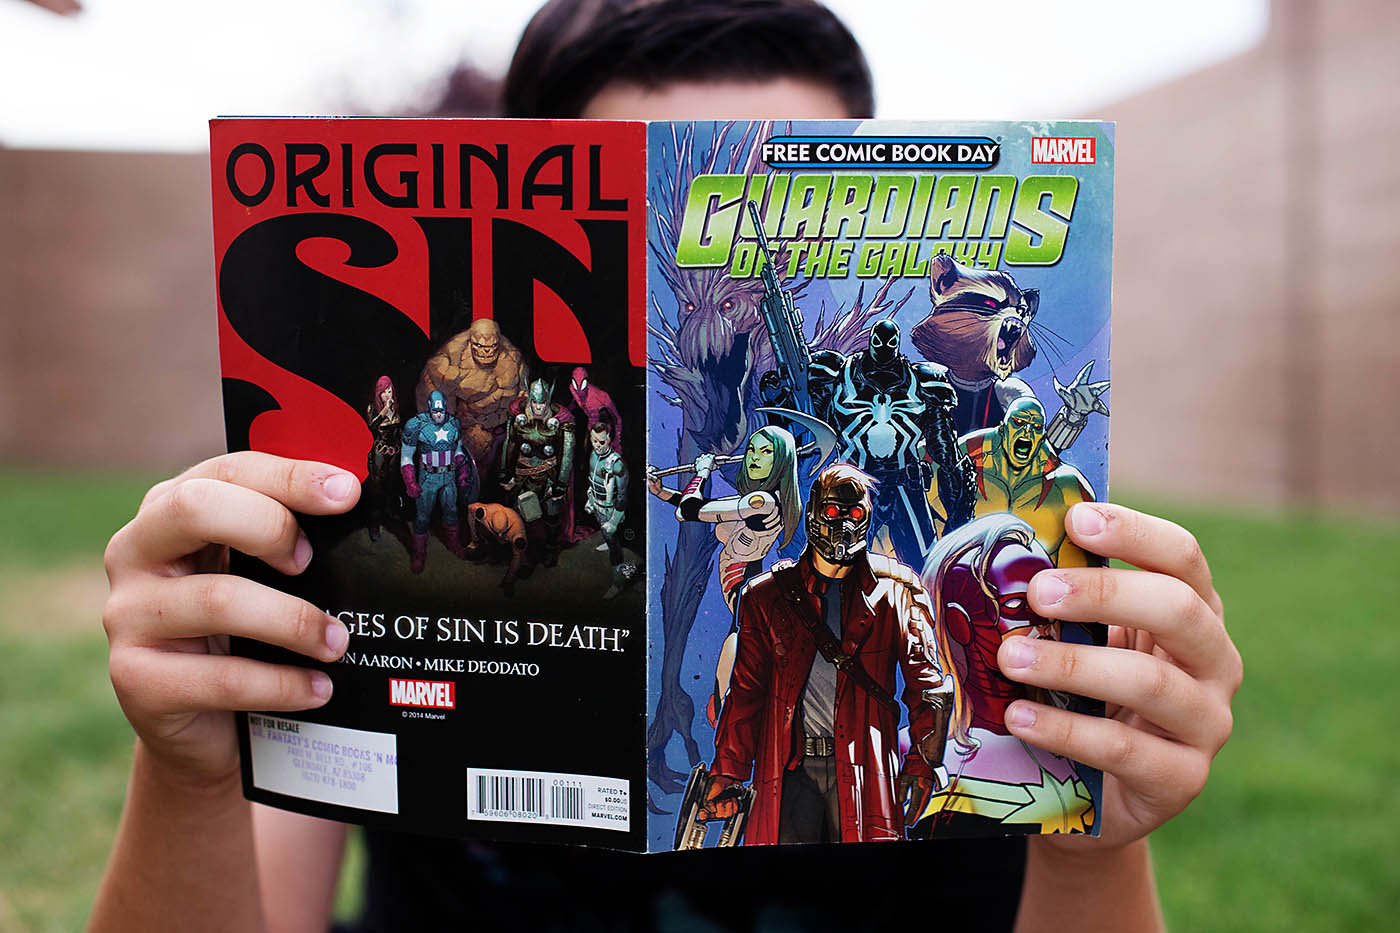 Free Comic Book Day! All the info on how to participate and what comics will be free